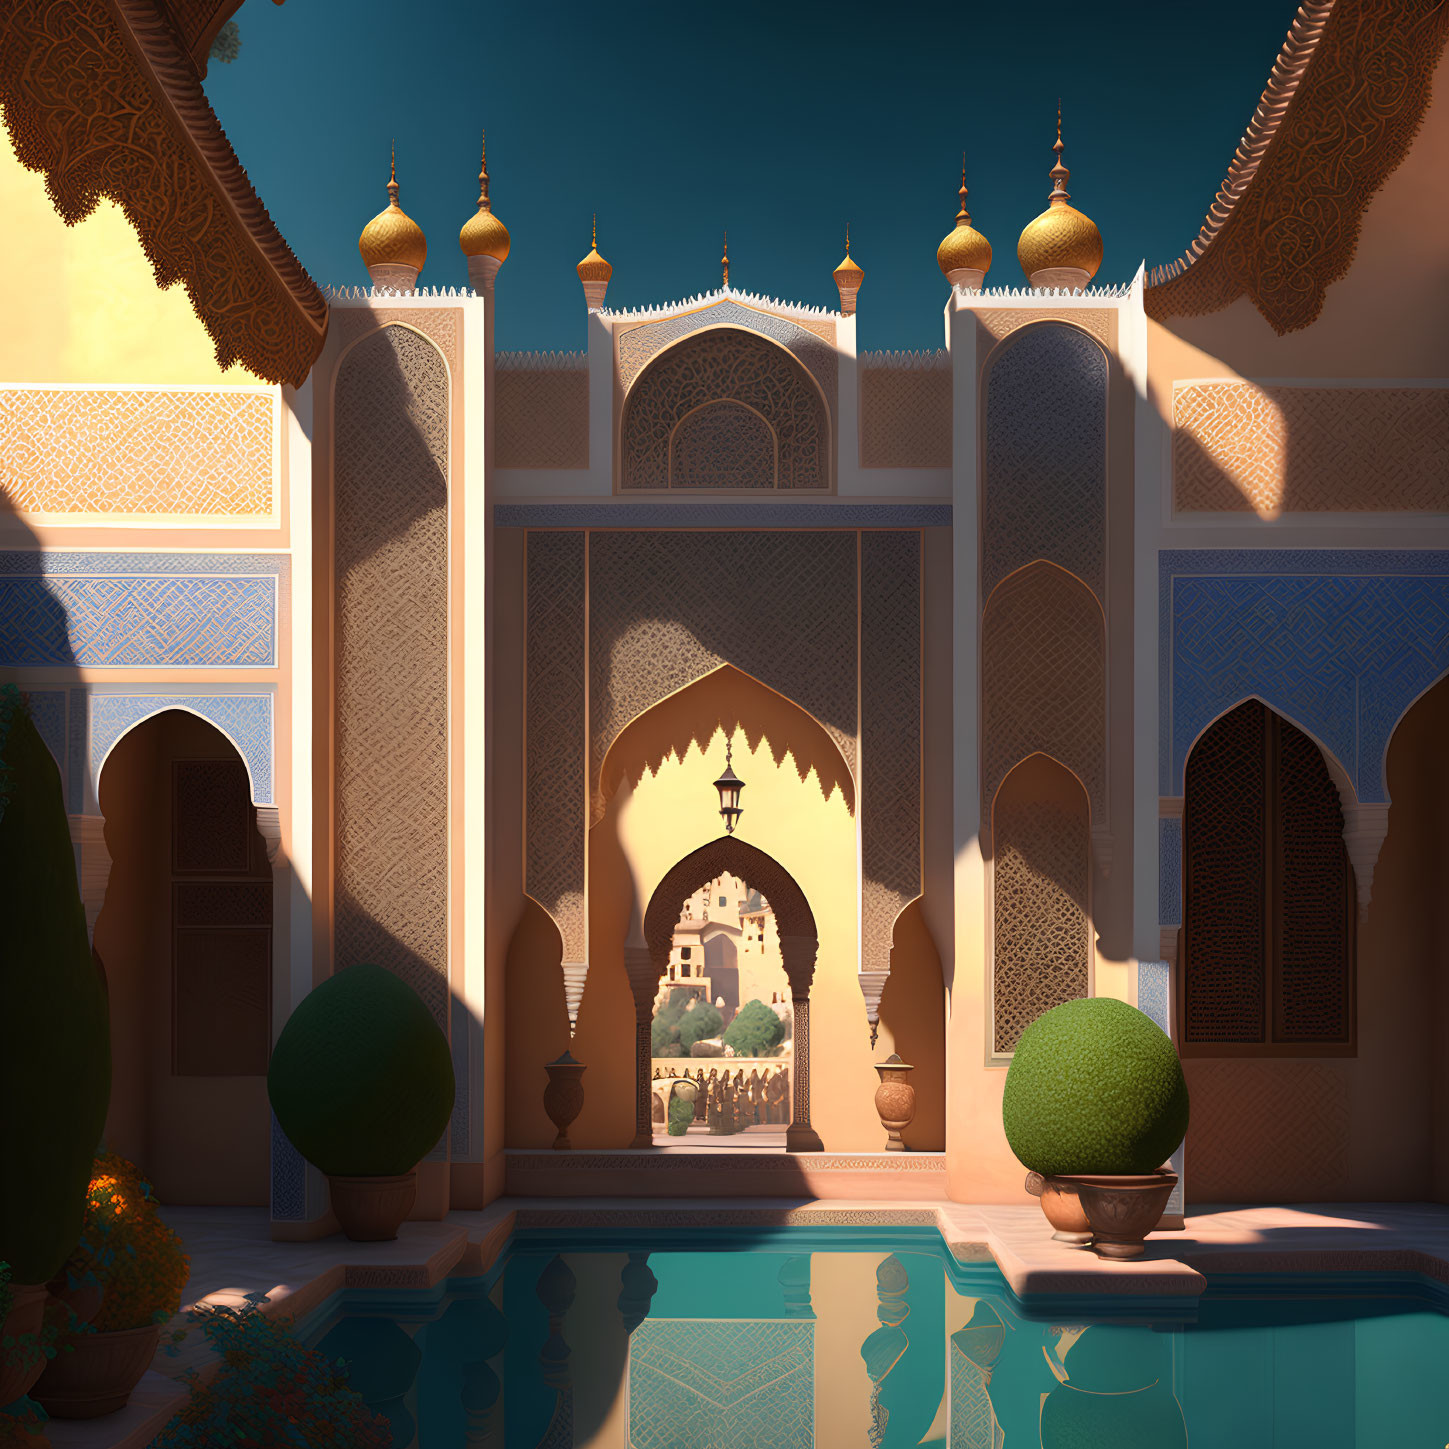 Ornate animated palace courtyard with golden domes and blue tile patterns